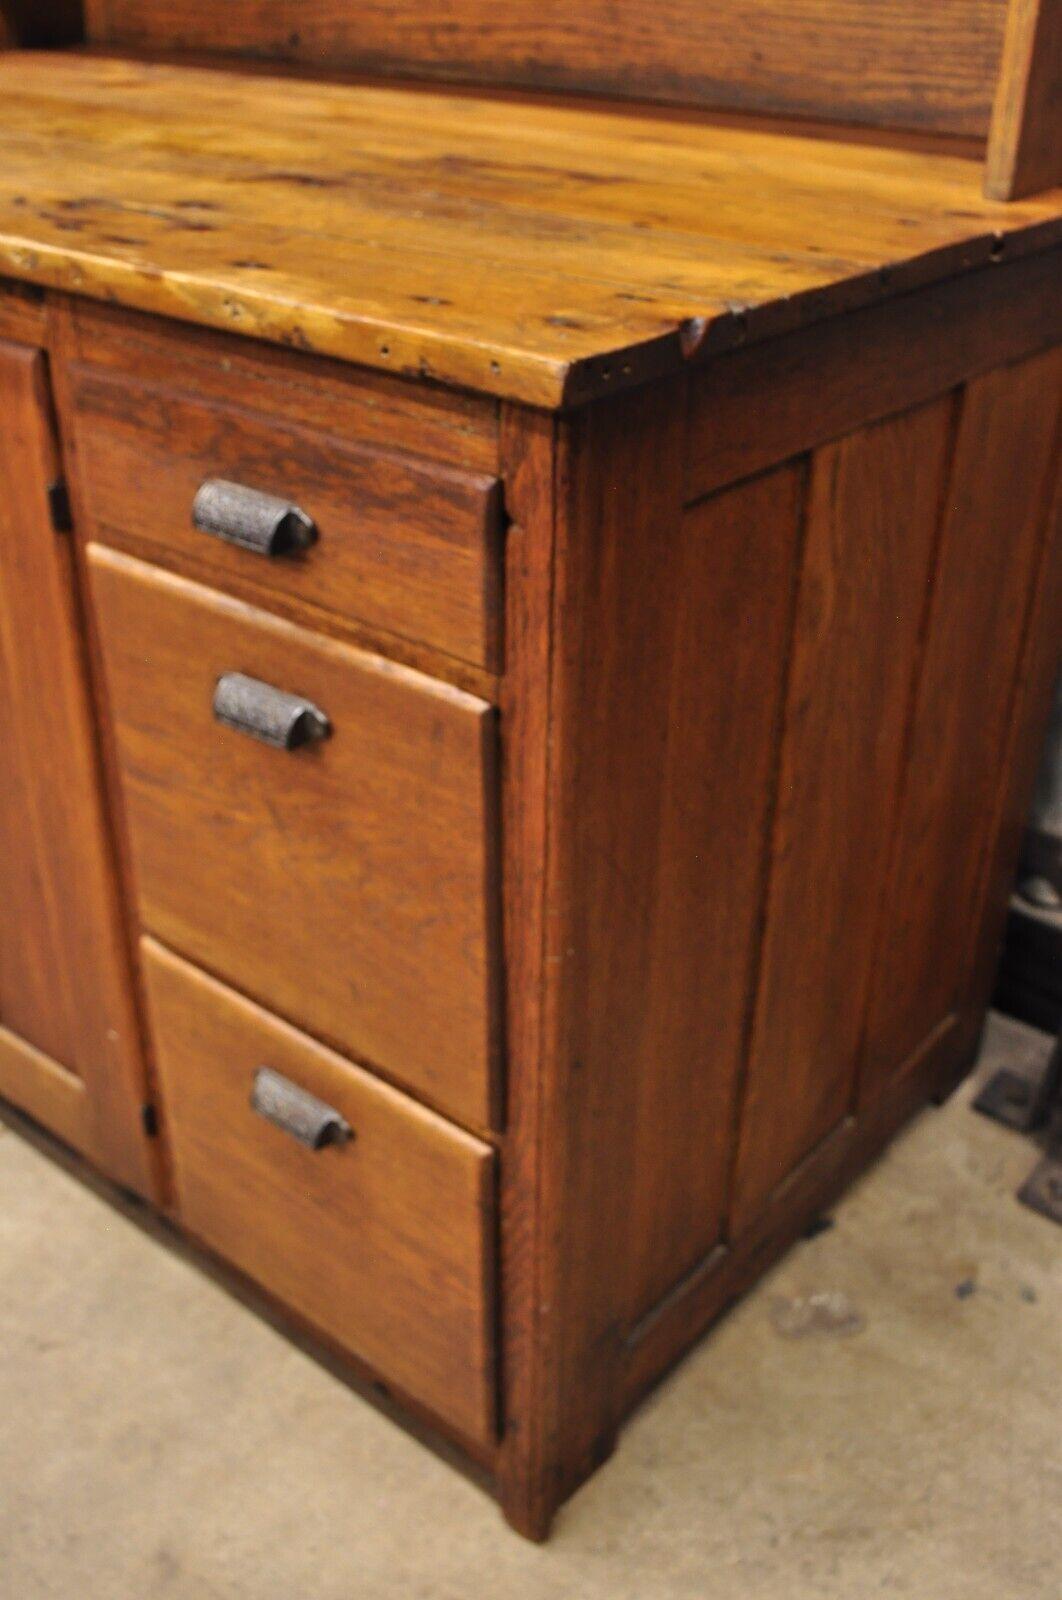 French Country Provincial Oak Wood Chestnut Kitchen Cupboard Hutch Cabinet 5